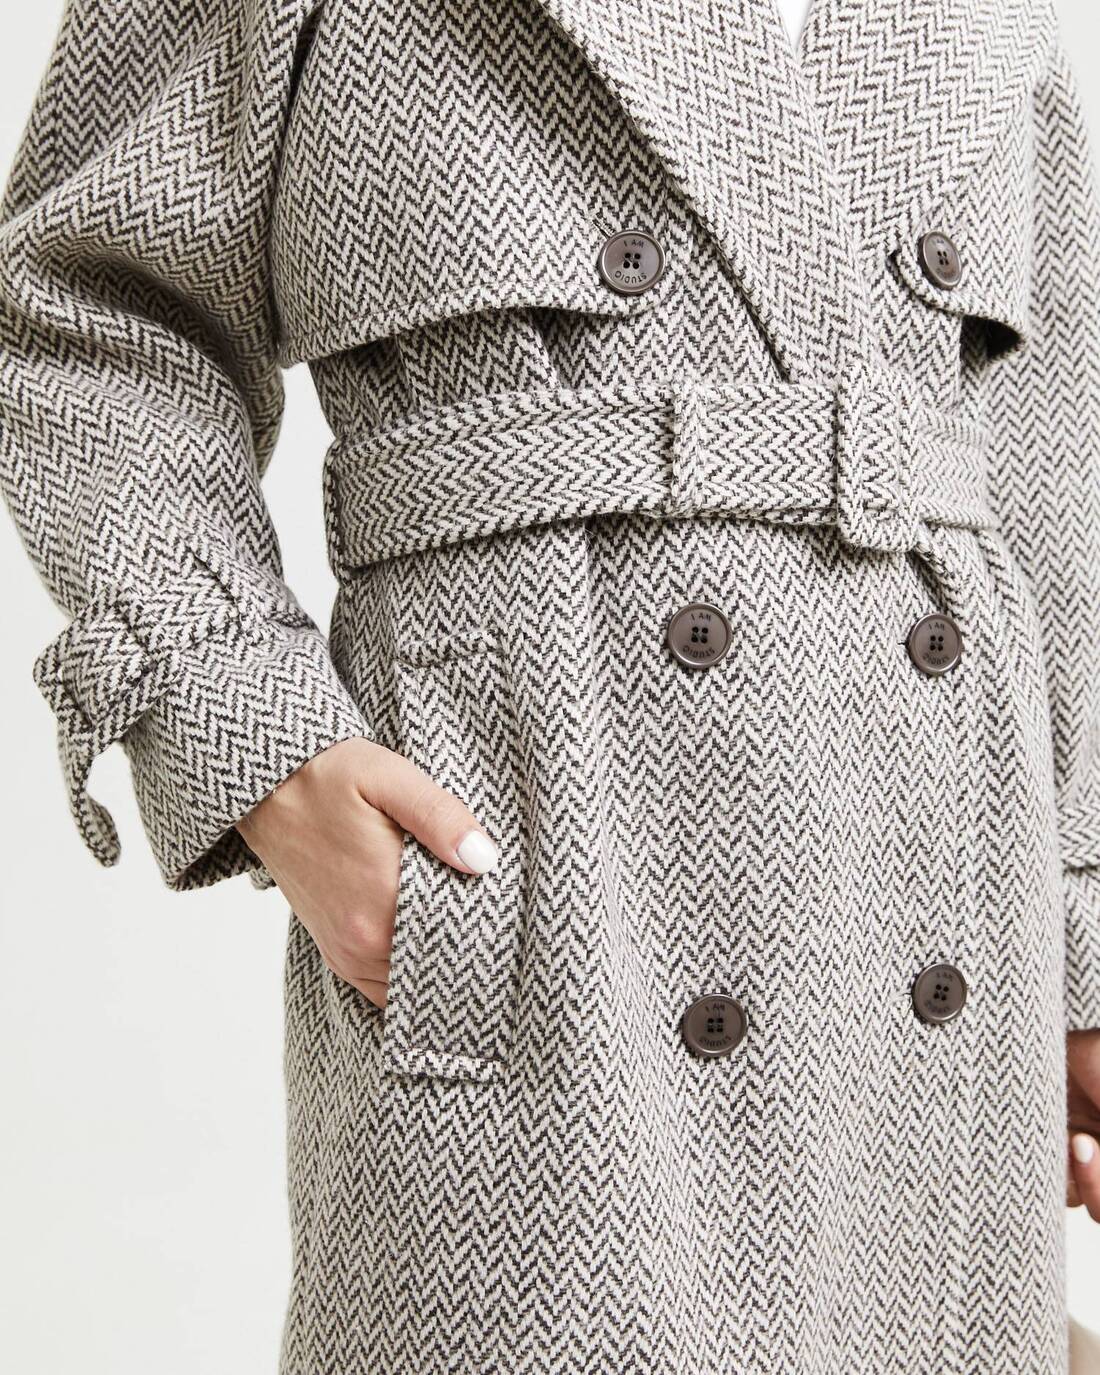 Double-breasted tweed trenchcoat